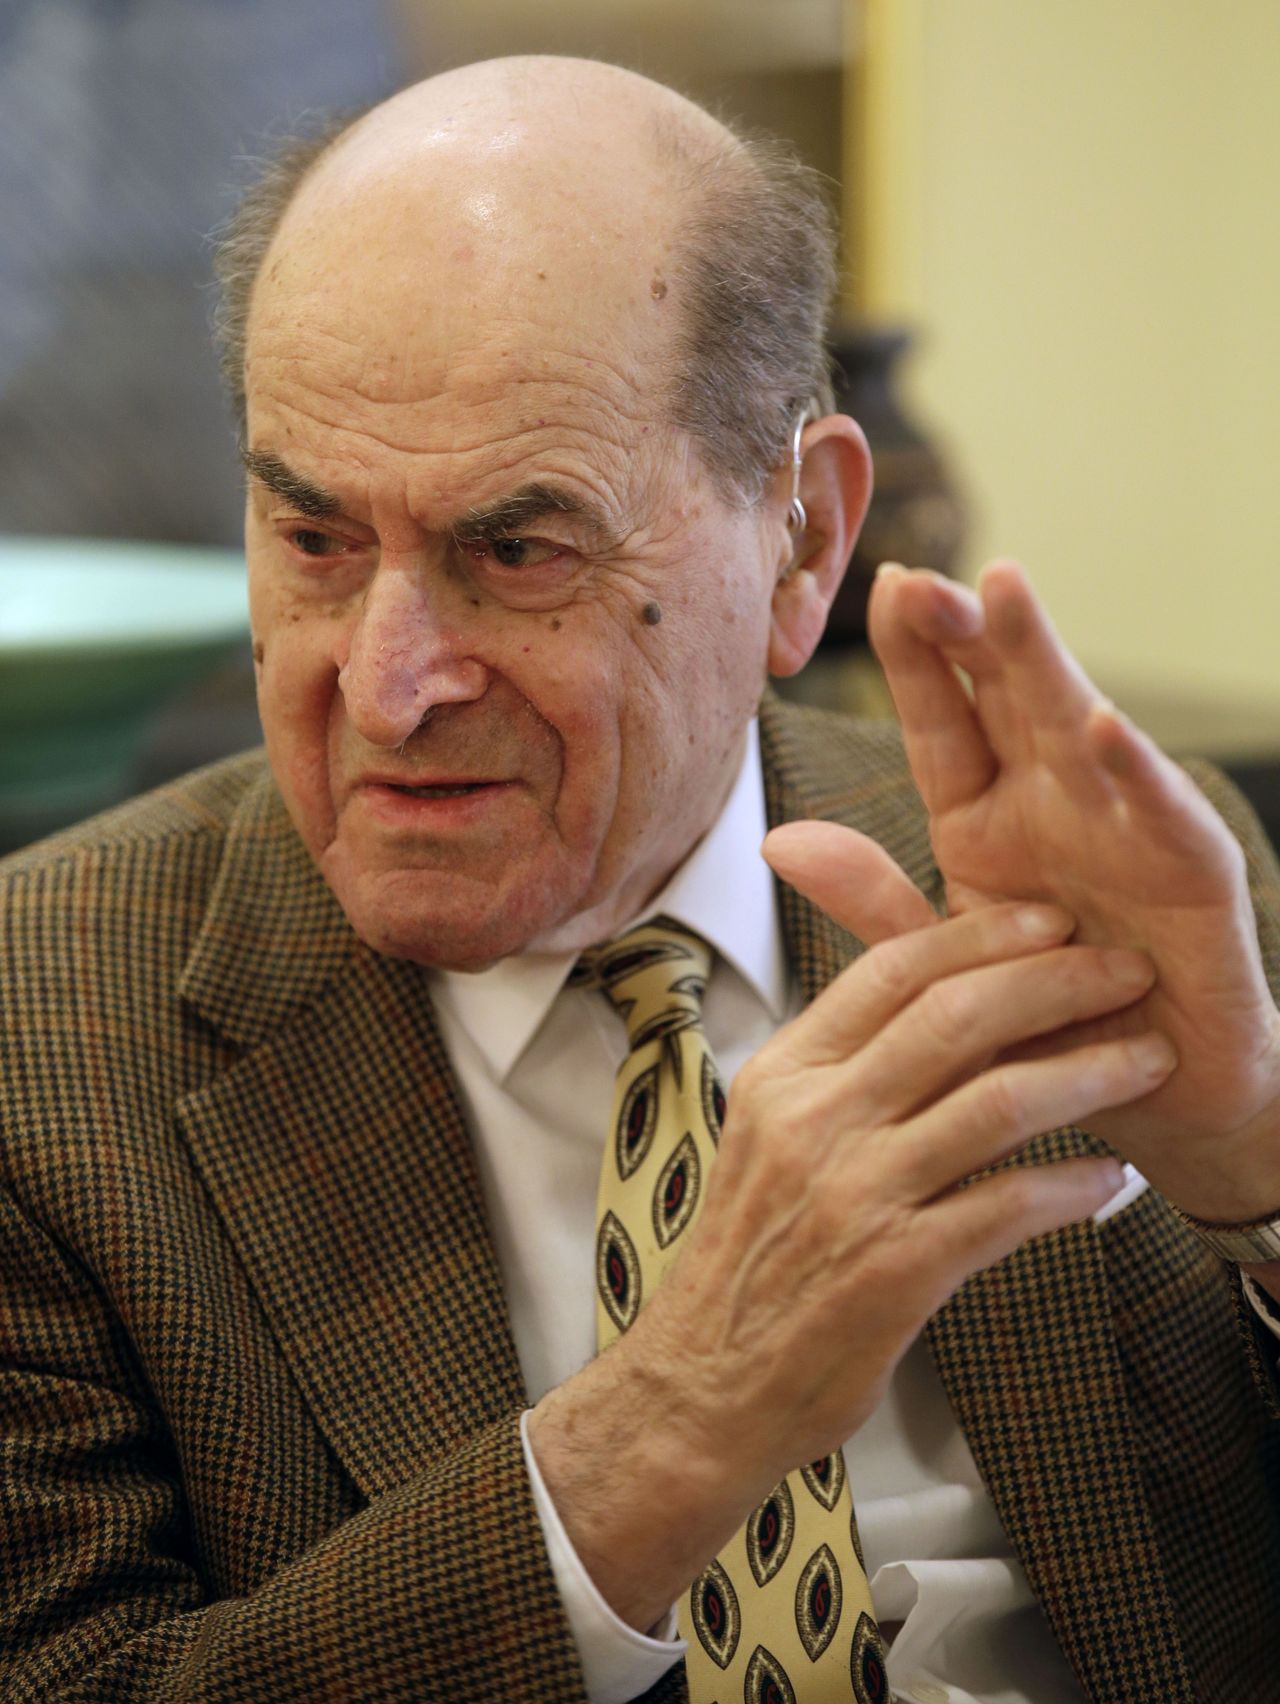 In this Feb. 5, 2014, photo, Dr. Henry Heimlich describes the maneuver he developed to help clear obstructions from the windpipes of choking victims, while being interviewed at his home in Cincinnati.